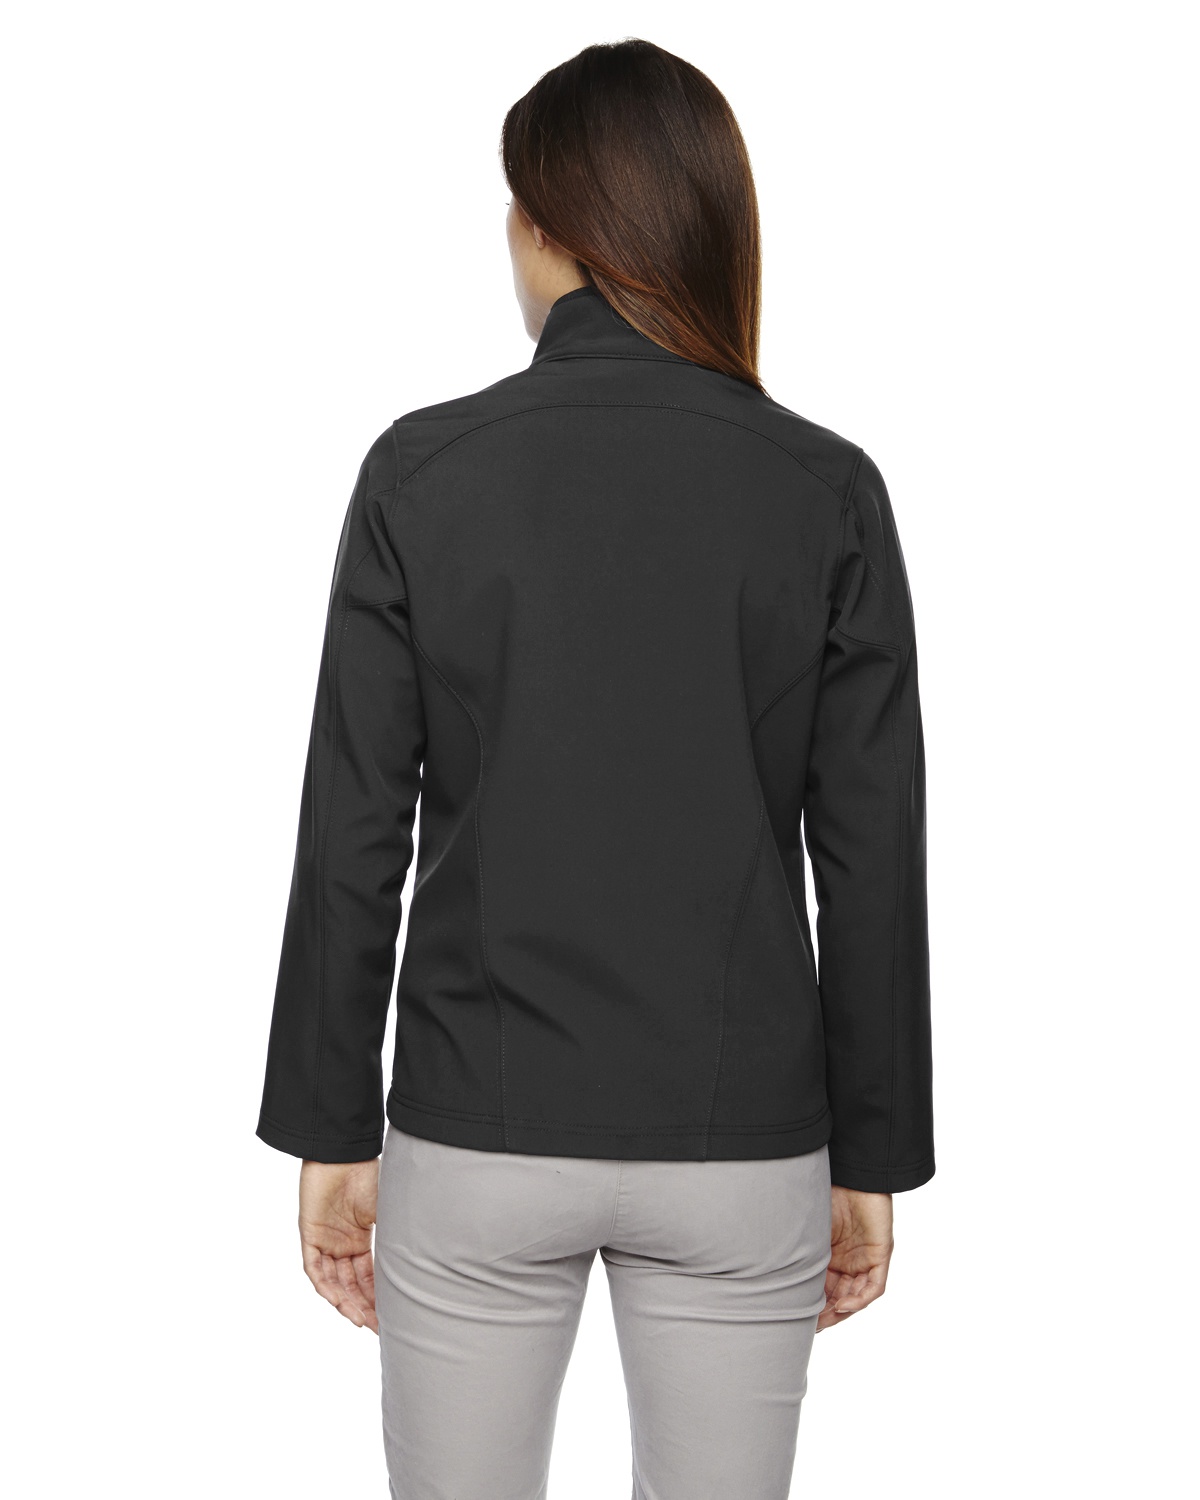 'Ash City - Core 365 78184 Ladies Cruise Two-Layer Fleece Bonded Soft Shell Jacket'